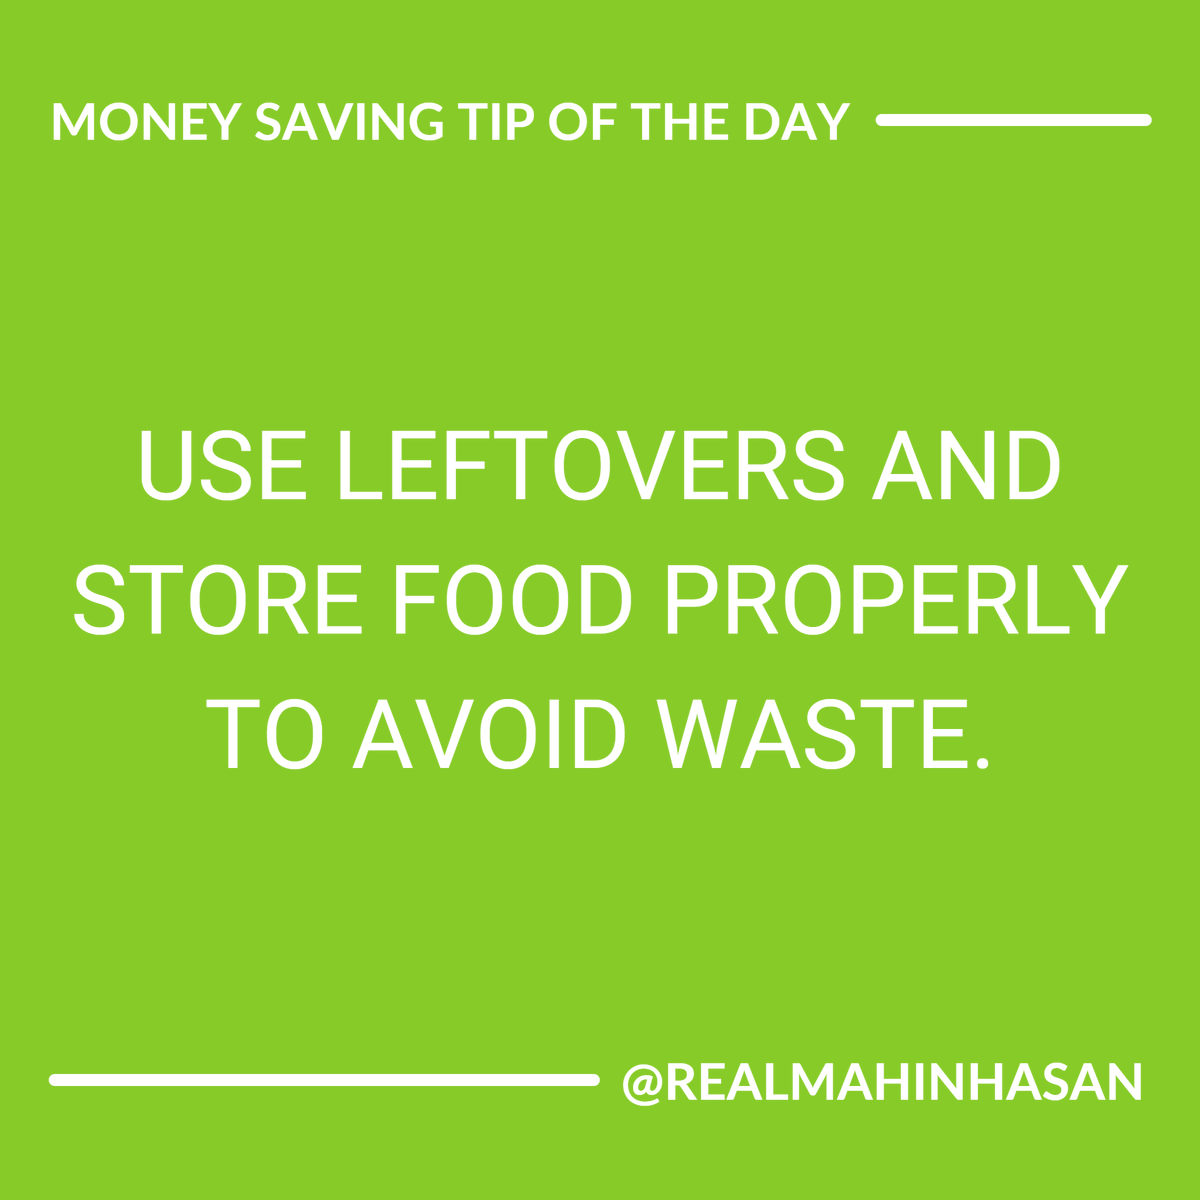 Reduce food waste - Use leftovers and store food properly. #FoodWasteReduction